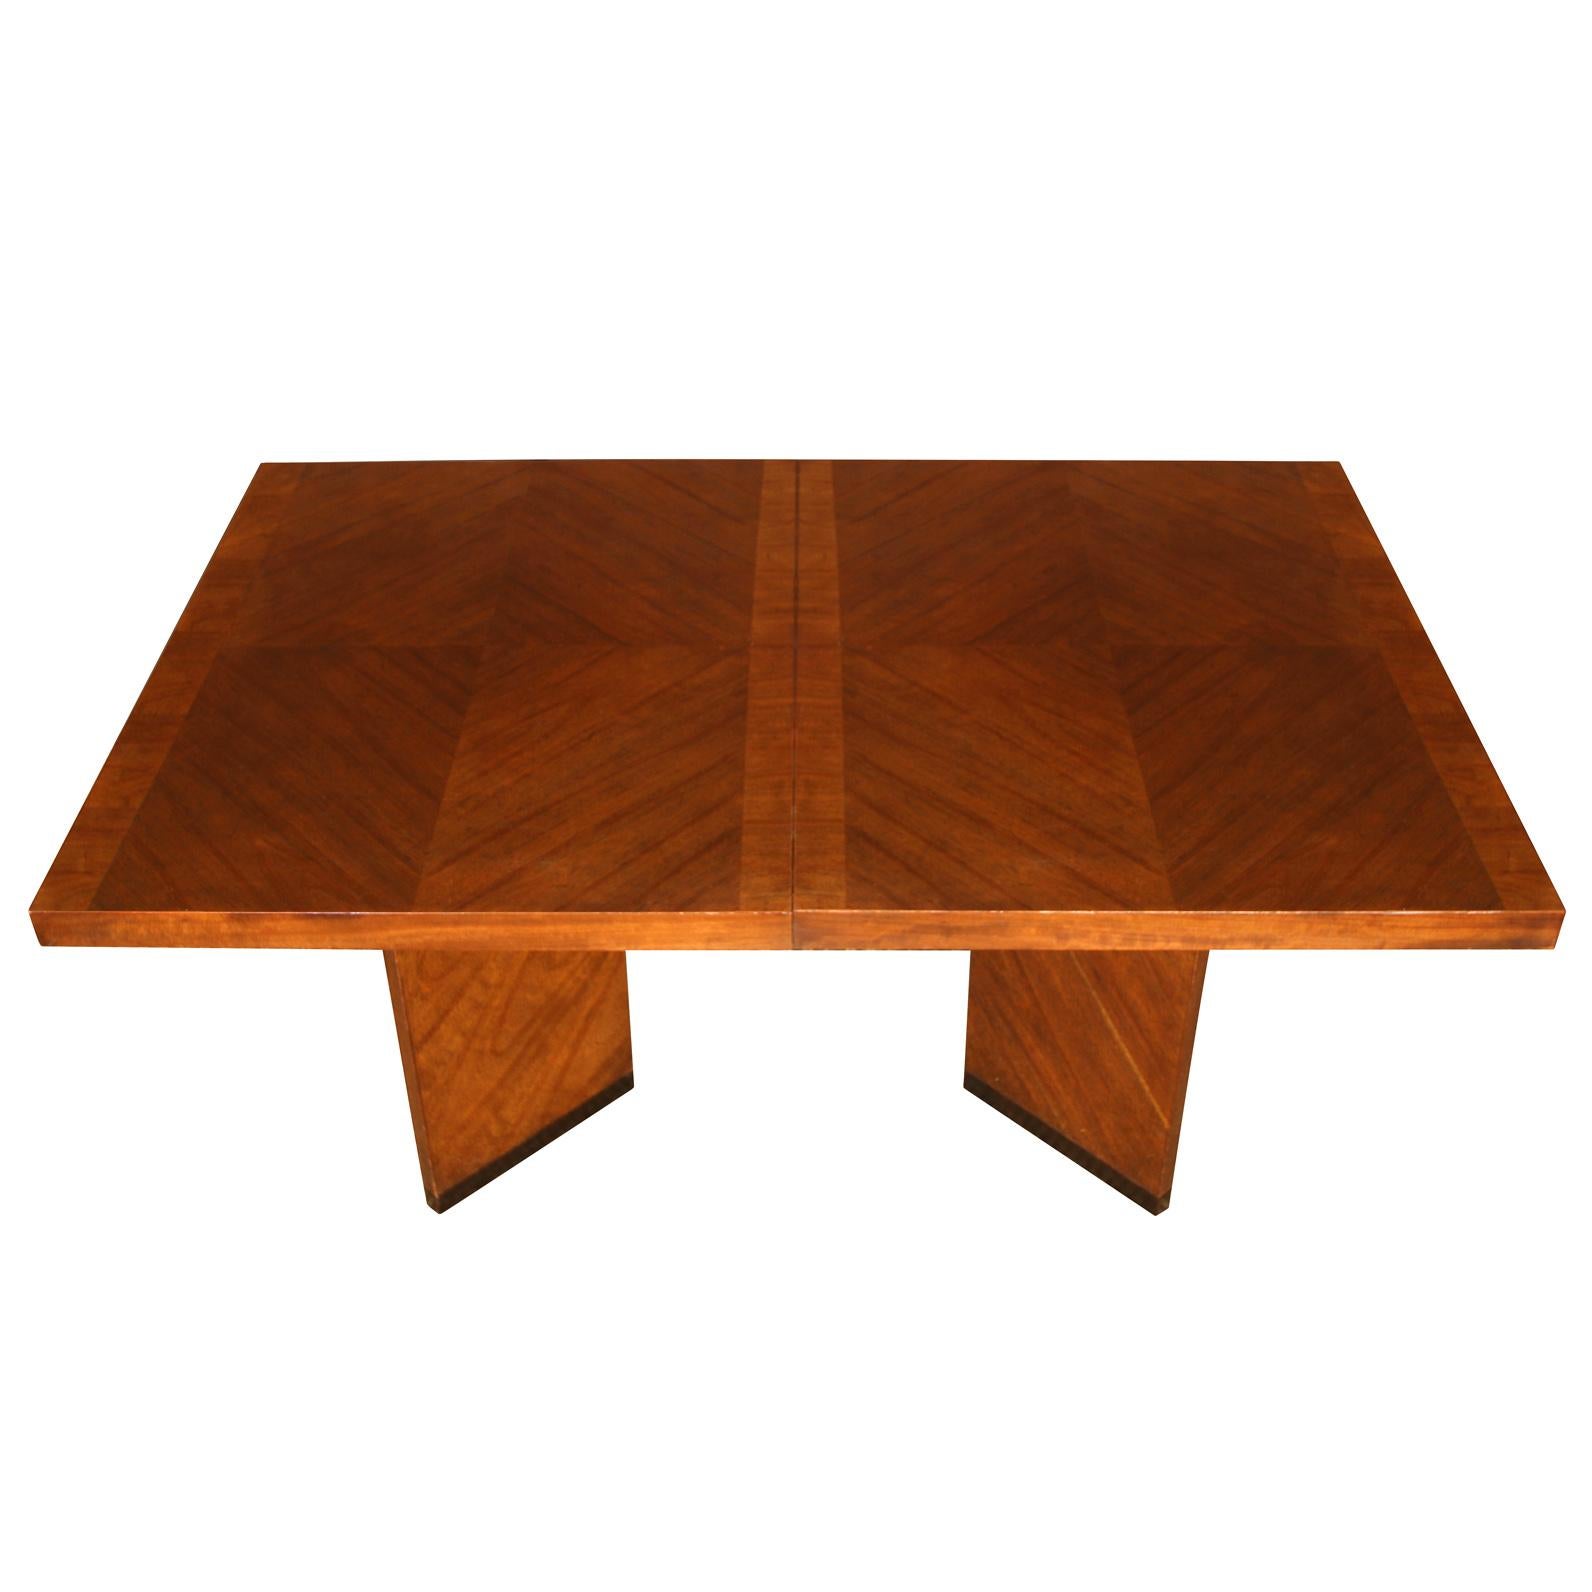 Vintage rectangular dining table in modern style with a bordered chevron inlay top, double angular pedestal base and two leaves in medium tone wood. Each leaf measures 18